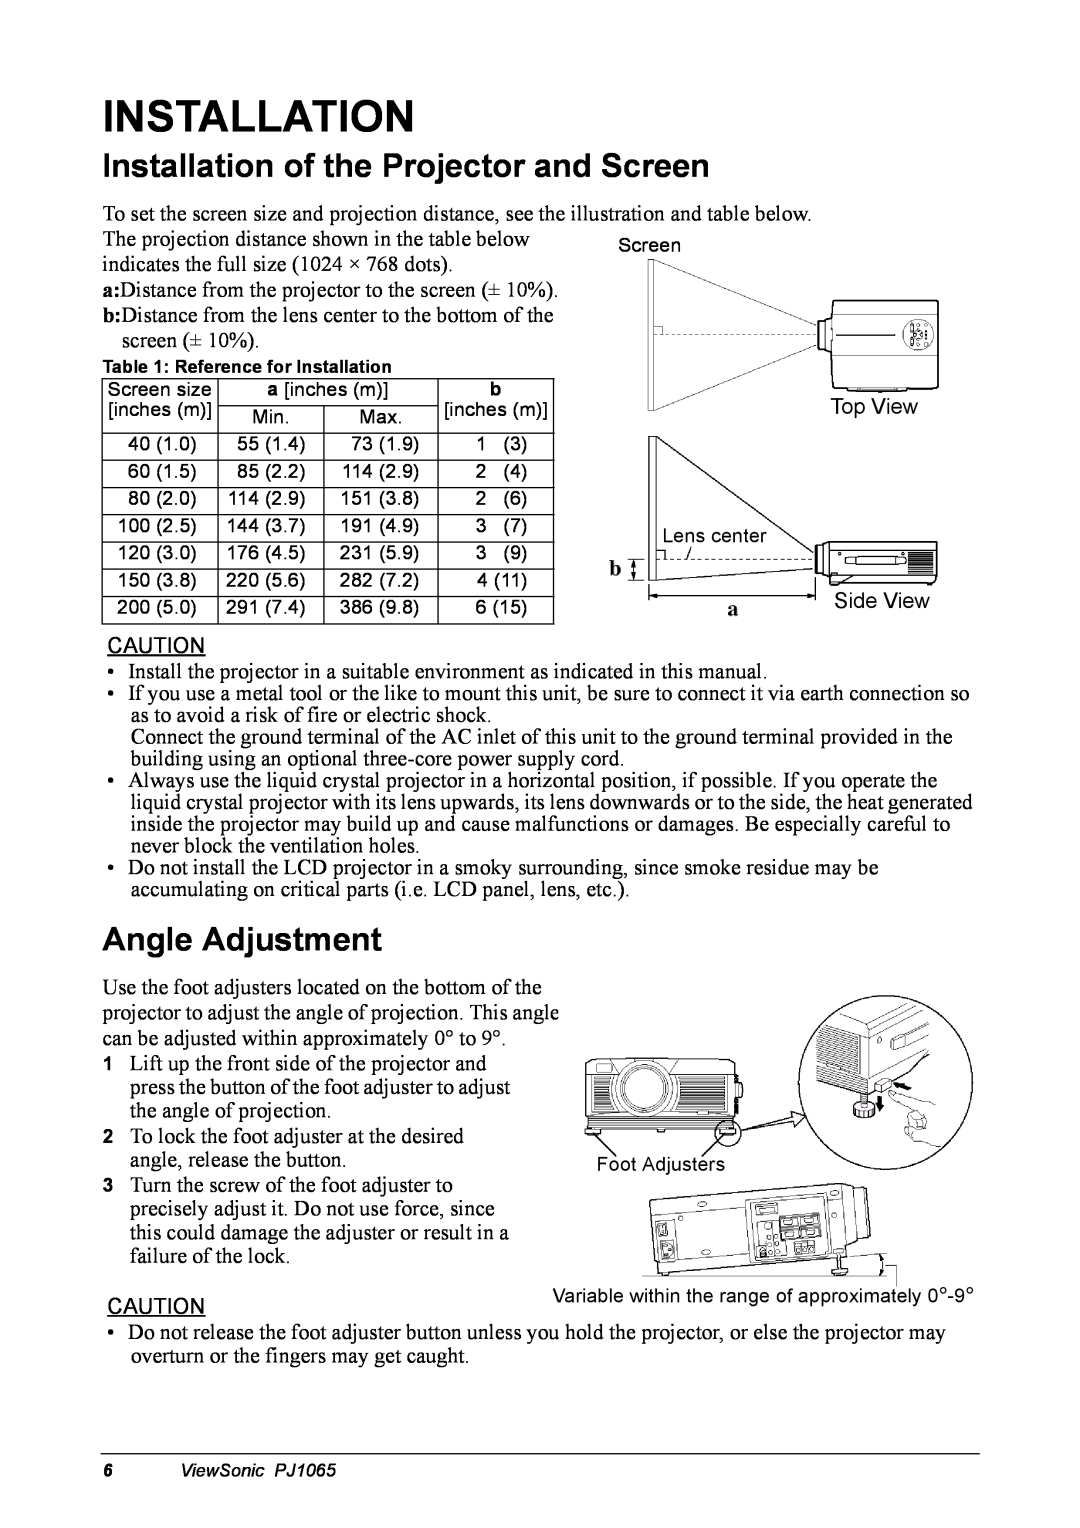 ViewSonic PJ1065 manual Installation of the Projector and Screen, Angle Adjustment 